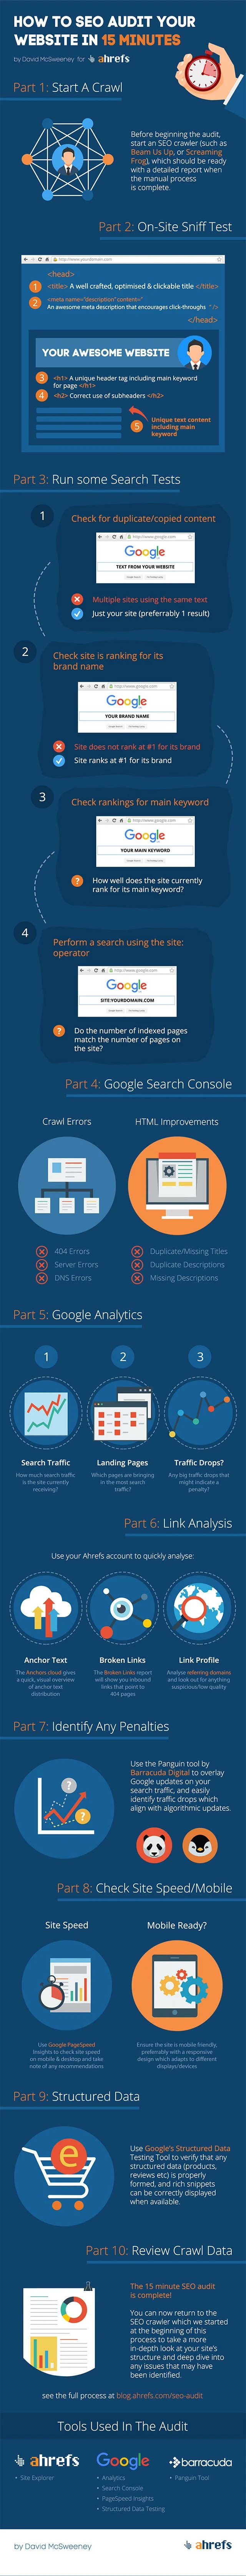 How To SEO Audit Your Website In 15 Minutes - #infographic